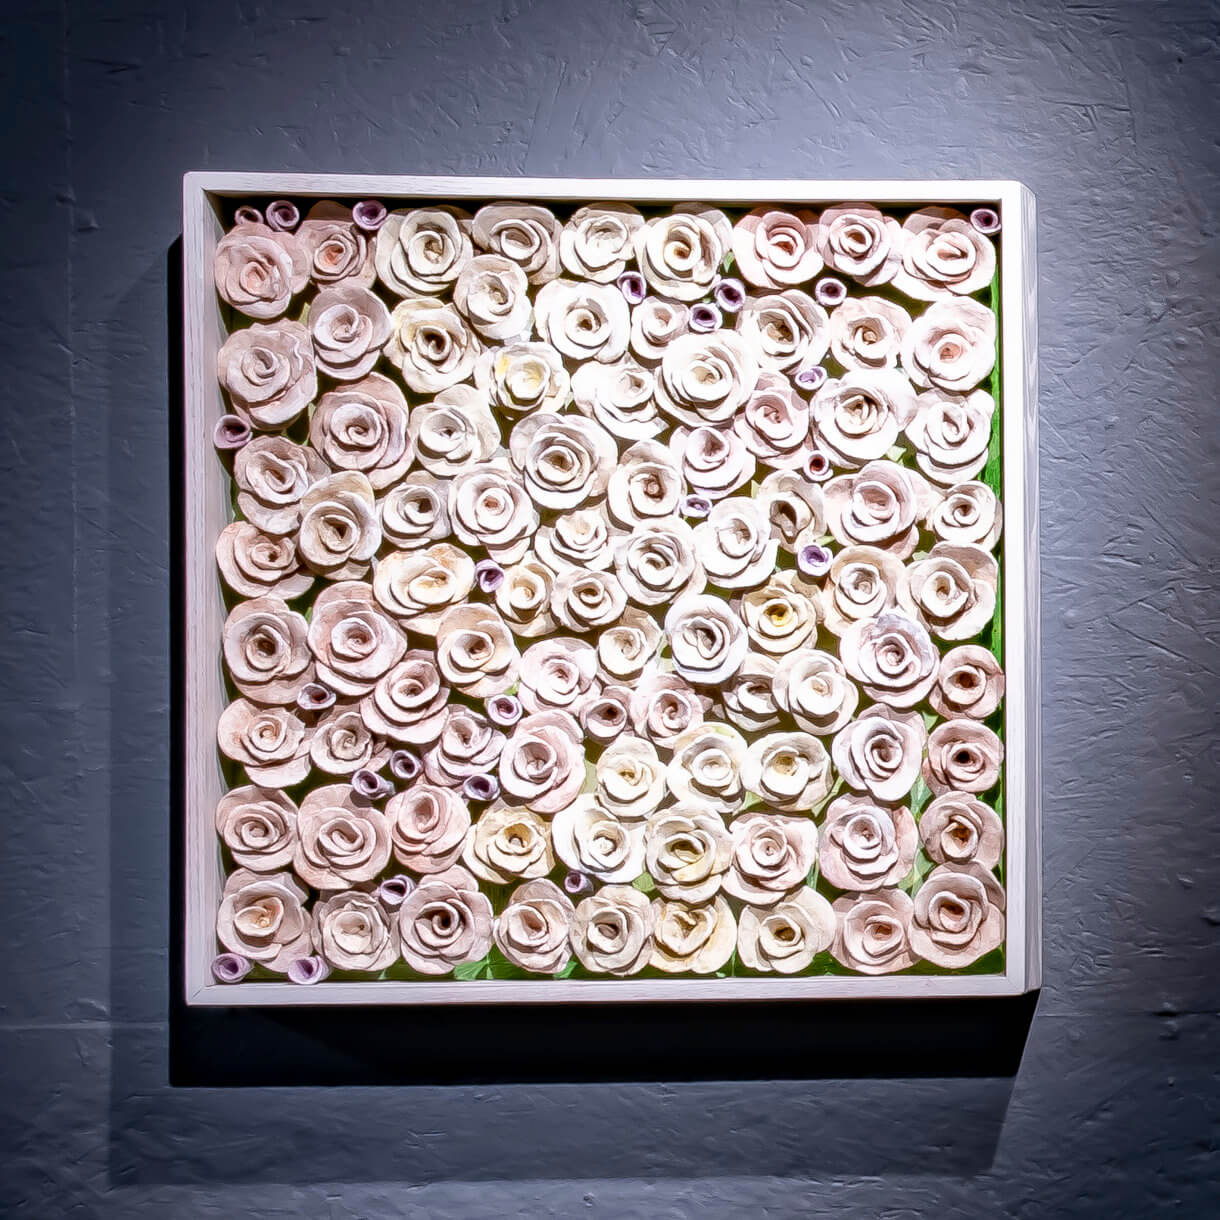 The Amulet Series 11 is a 26”x26” framed wooden box of low fired hand crafted clay roses in off white and pale pastels.